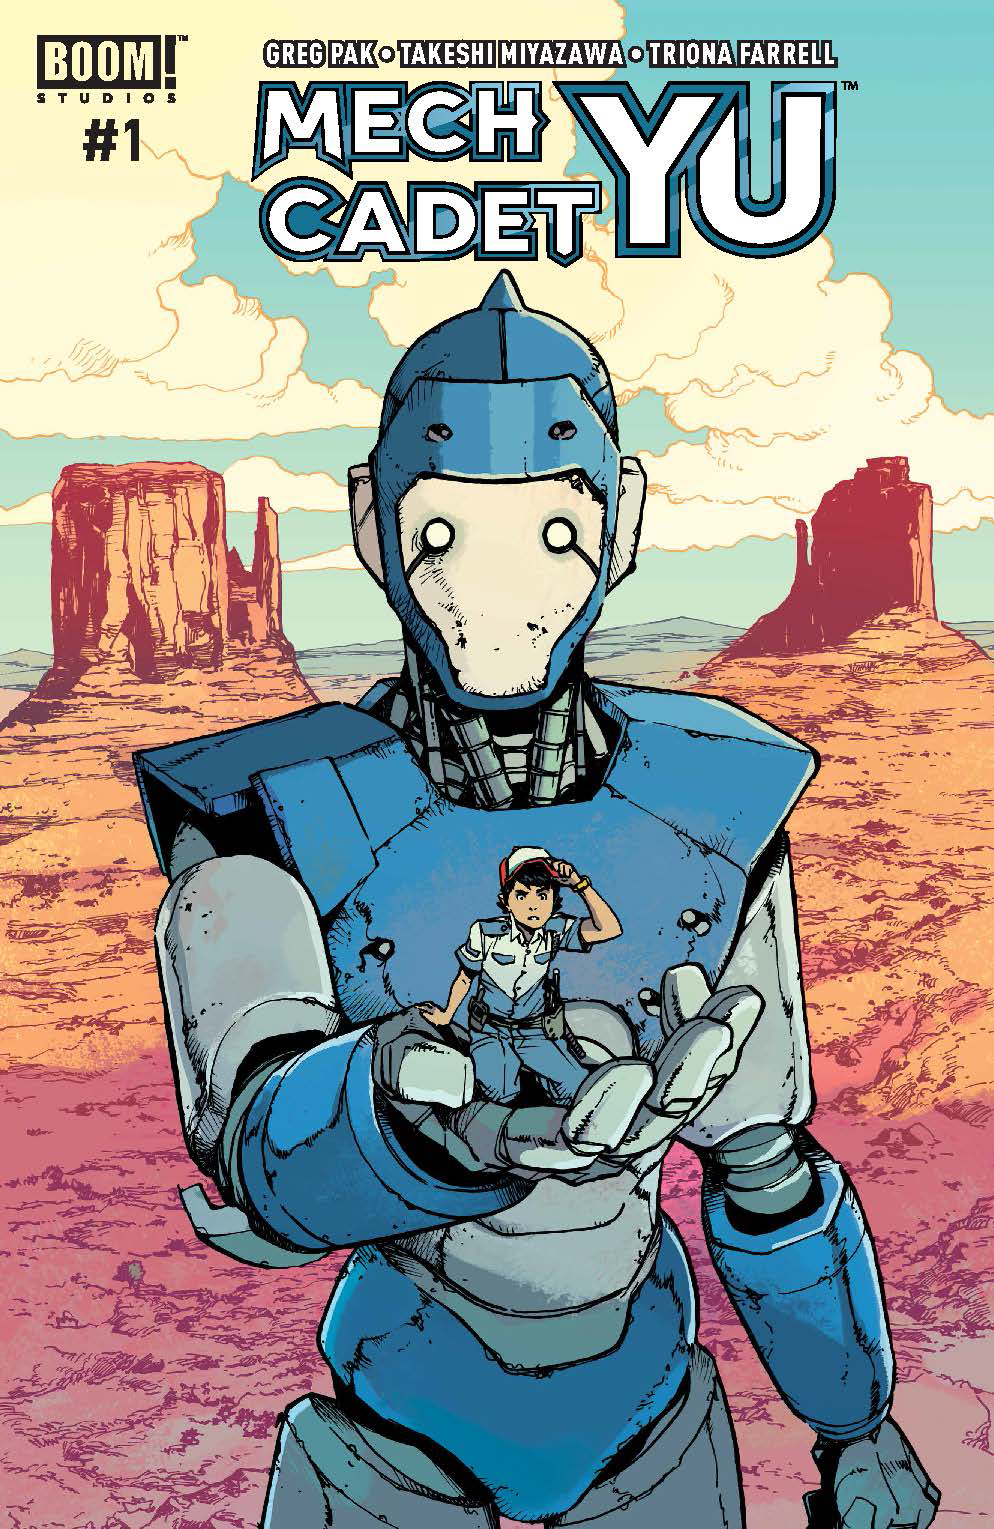 Greg Pak On Loving Giant Robots And Championing Asian American Heroes In Mech Cadet Yu